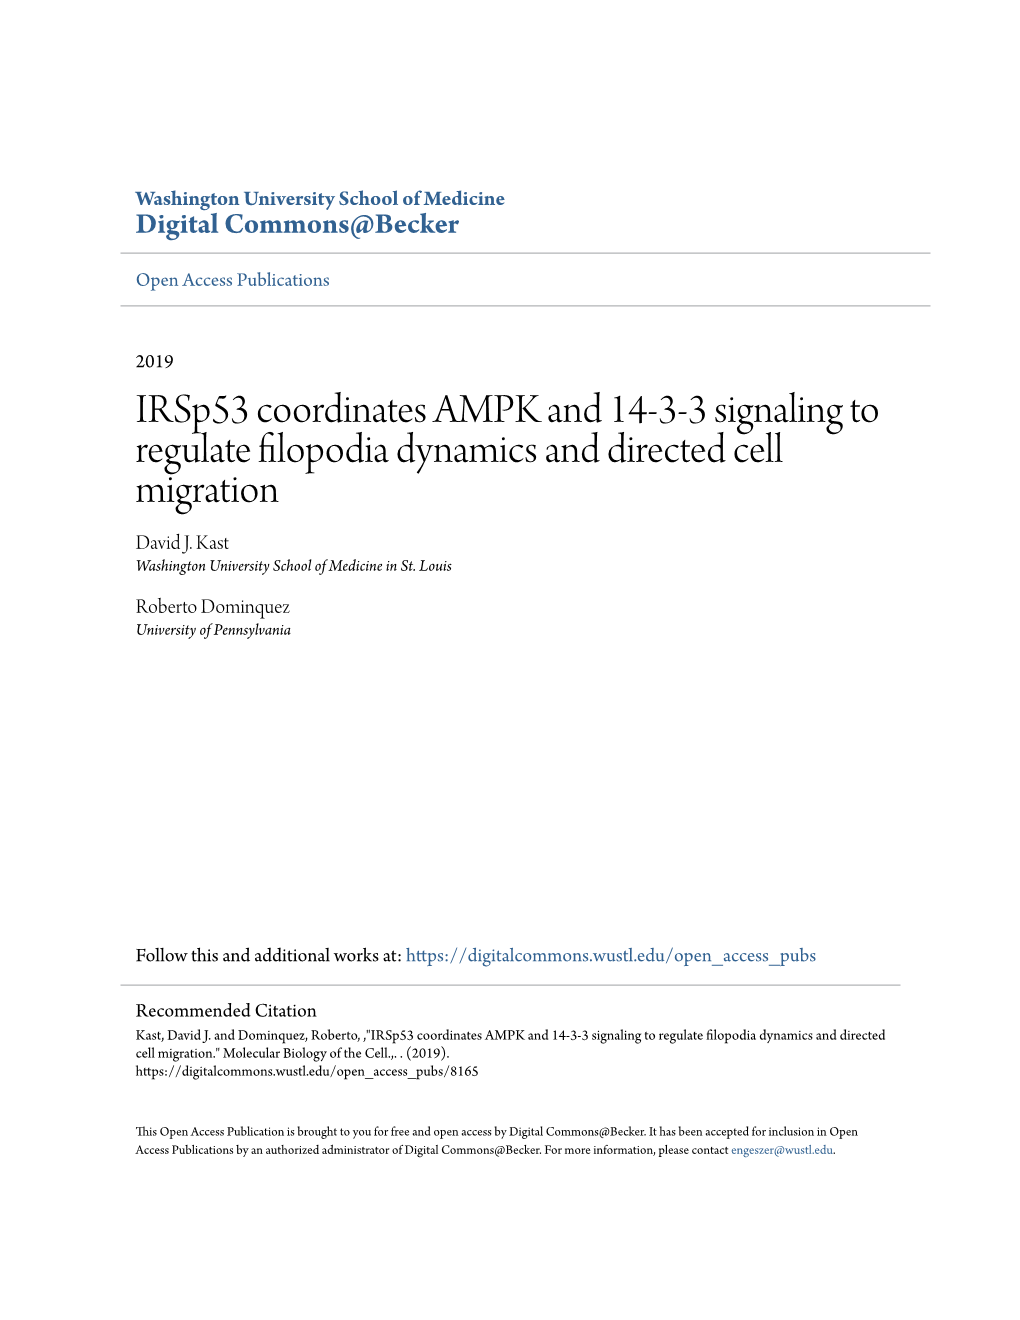 Irsp53 Coordinates AMPK and 14-3-3 Signaling to Regulate Filopodia Dynamics and Directed Cell Migration David J